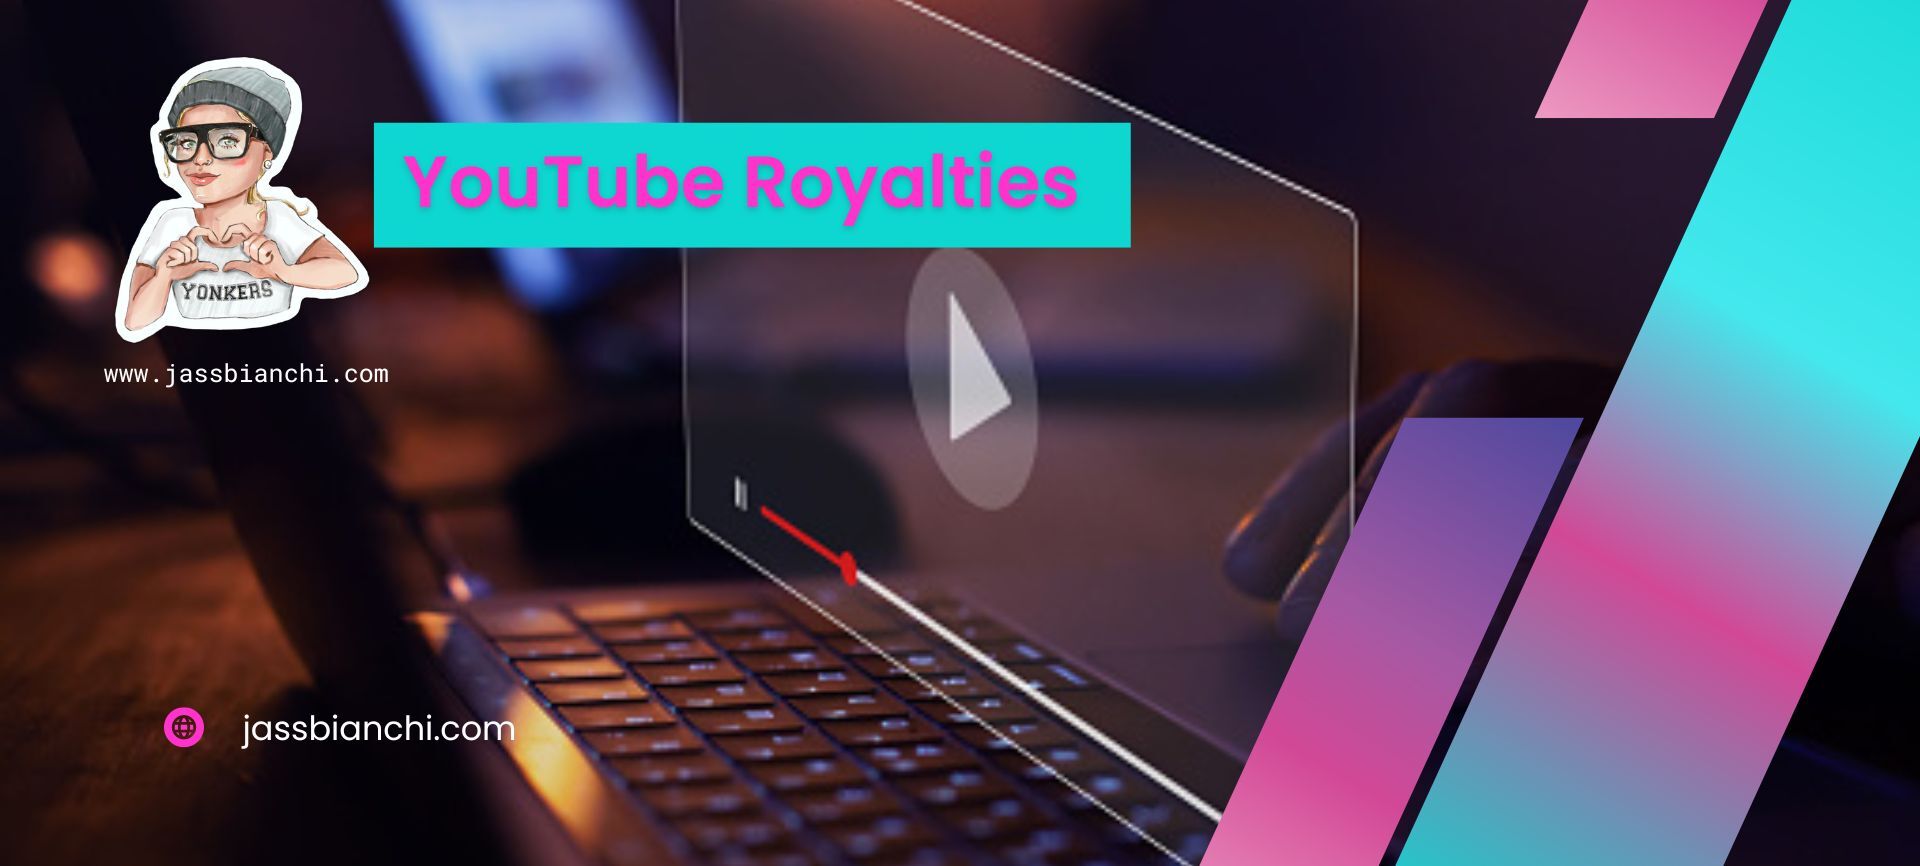 What are YouTube Royalties?